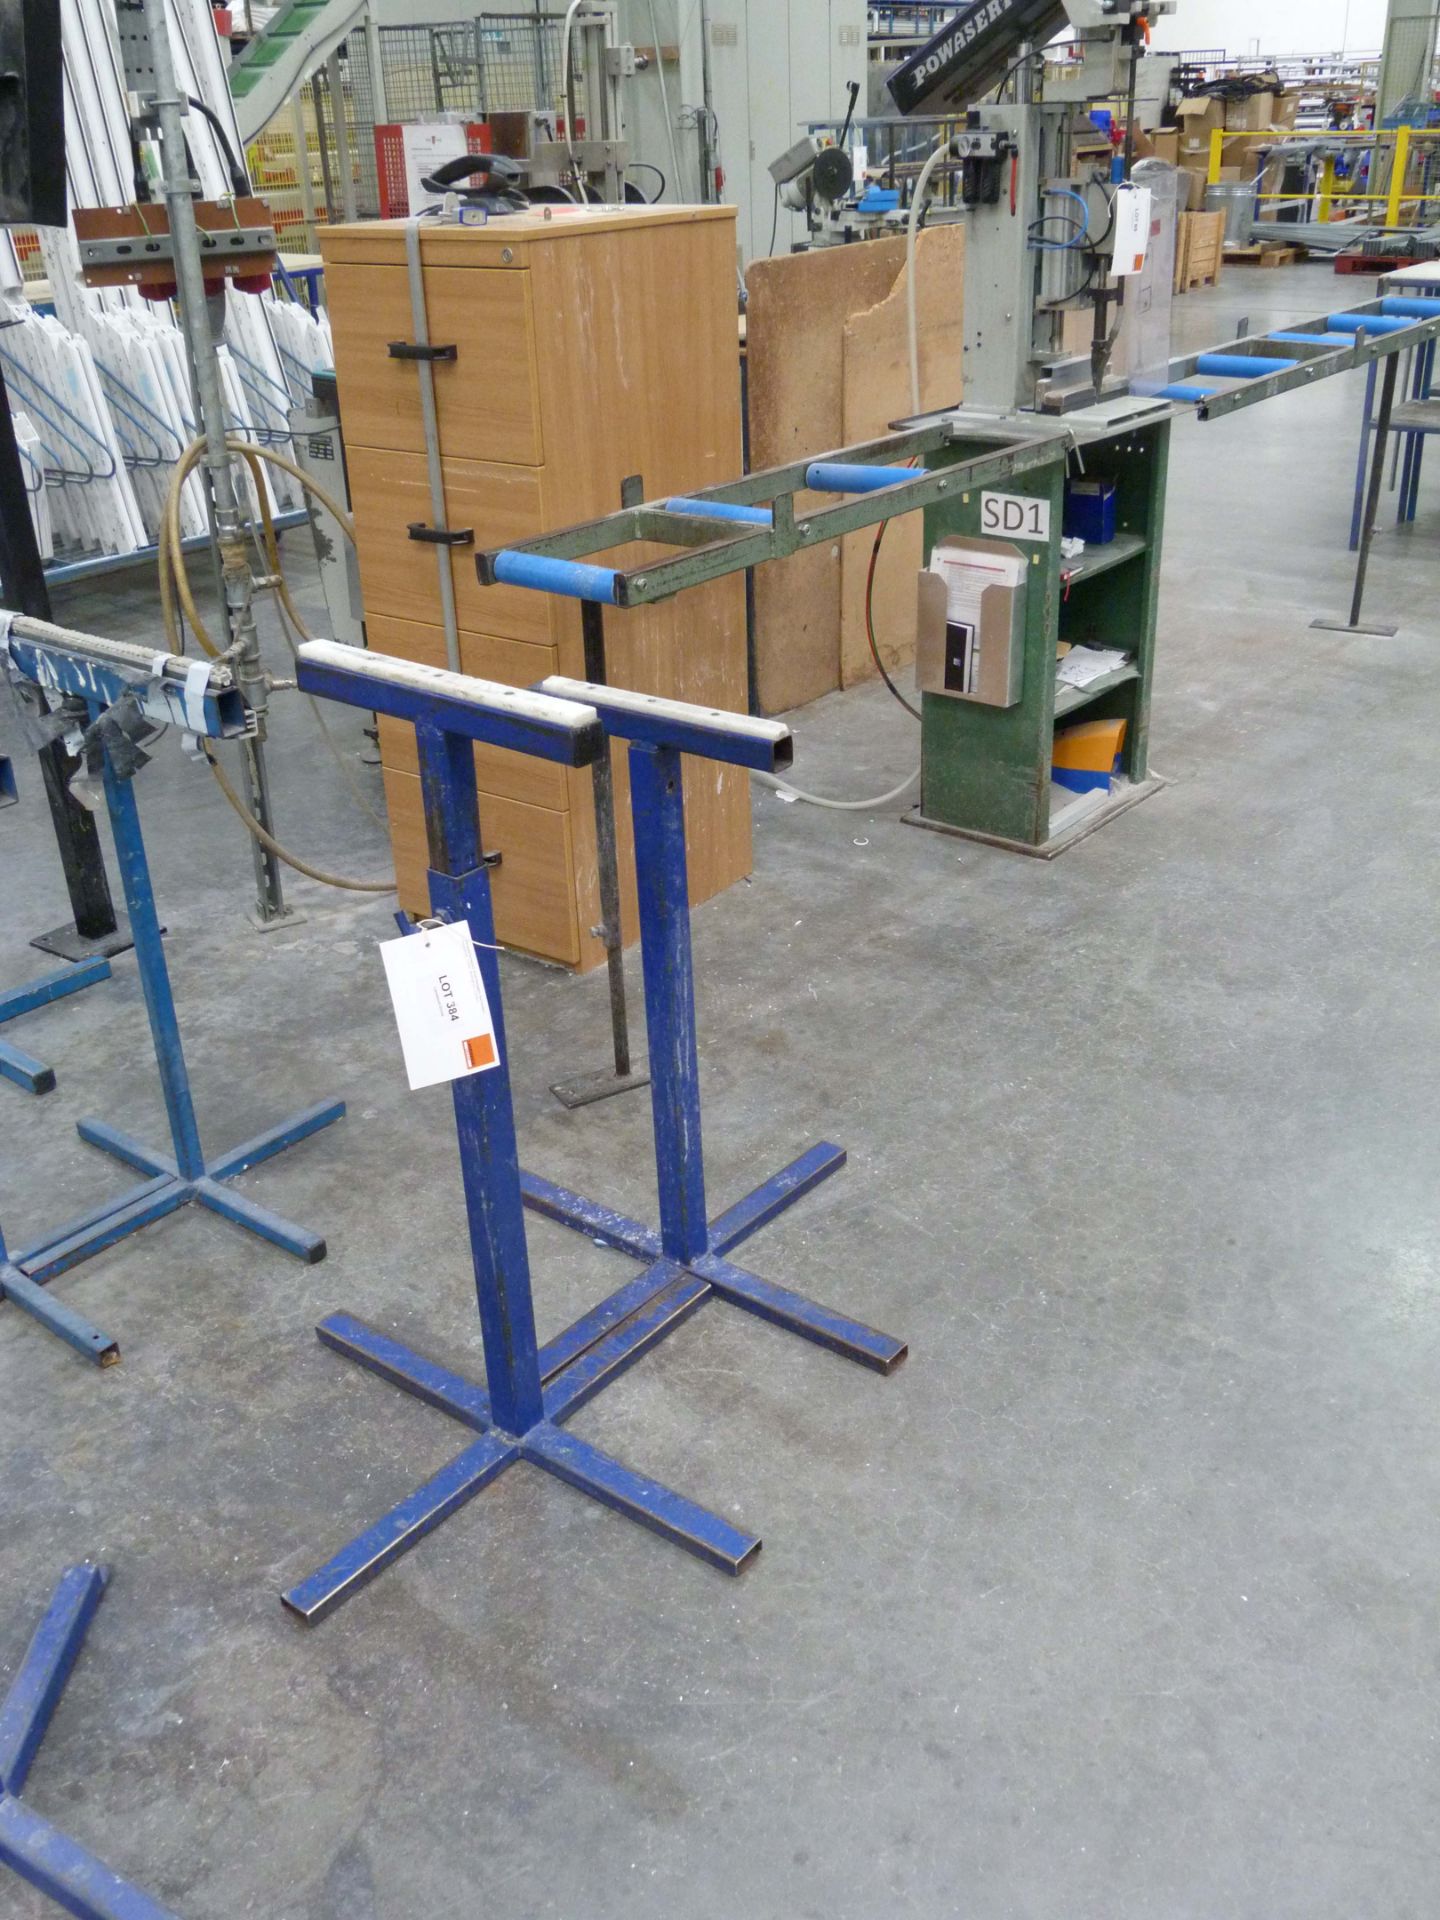 Pair of adjustable stands